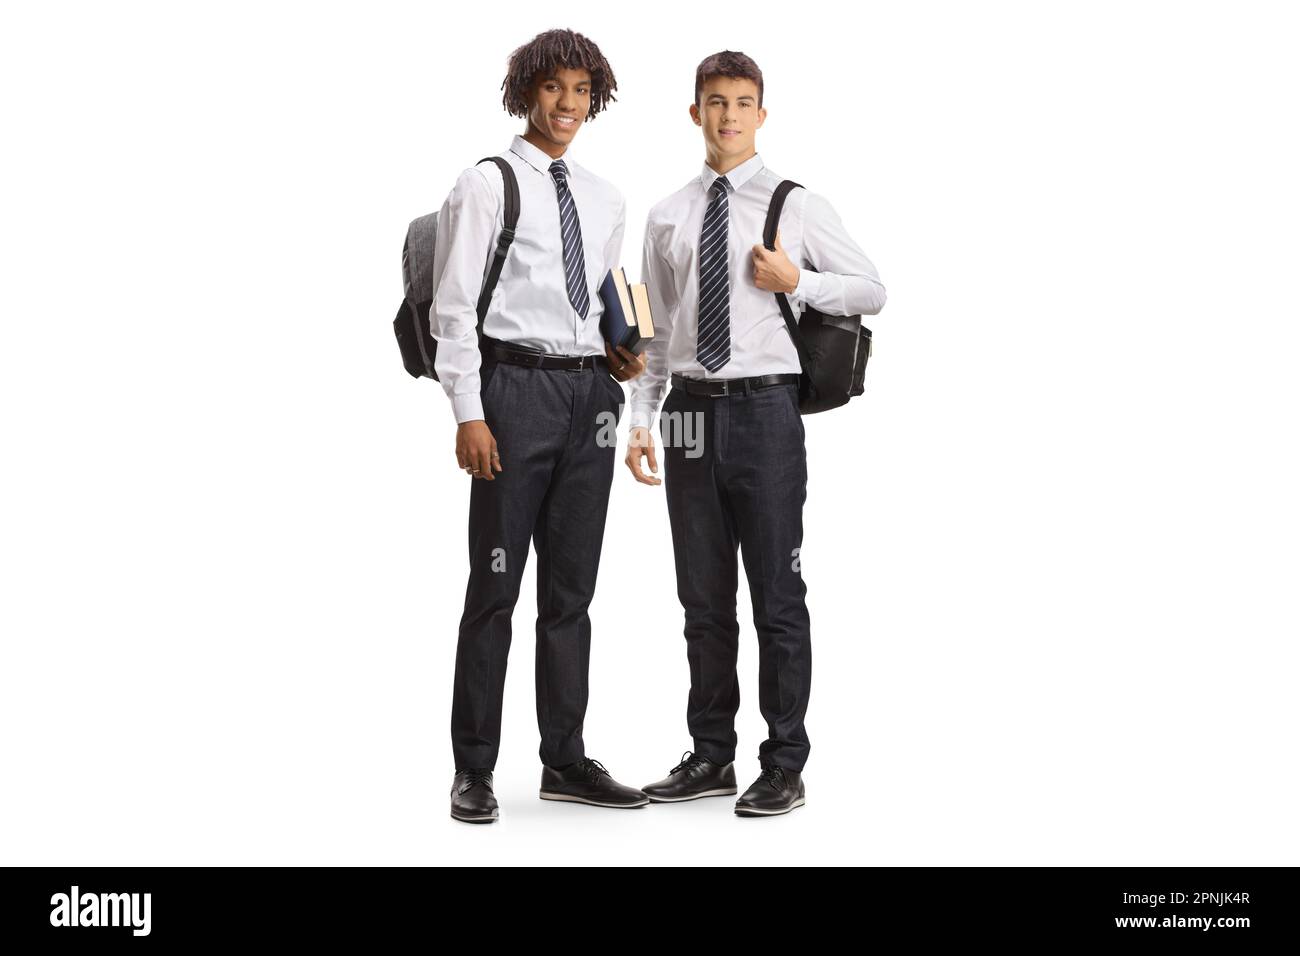 Caucasian and african american male students in college uniforms isolated on white background Stock Photo